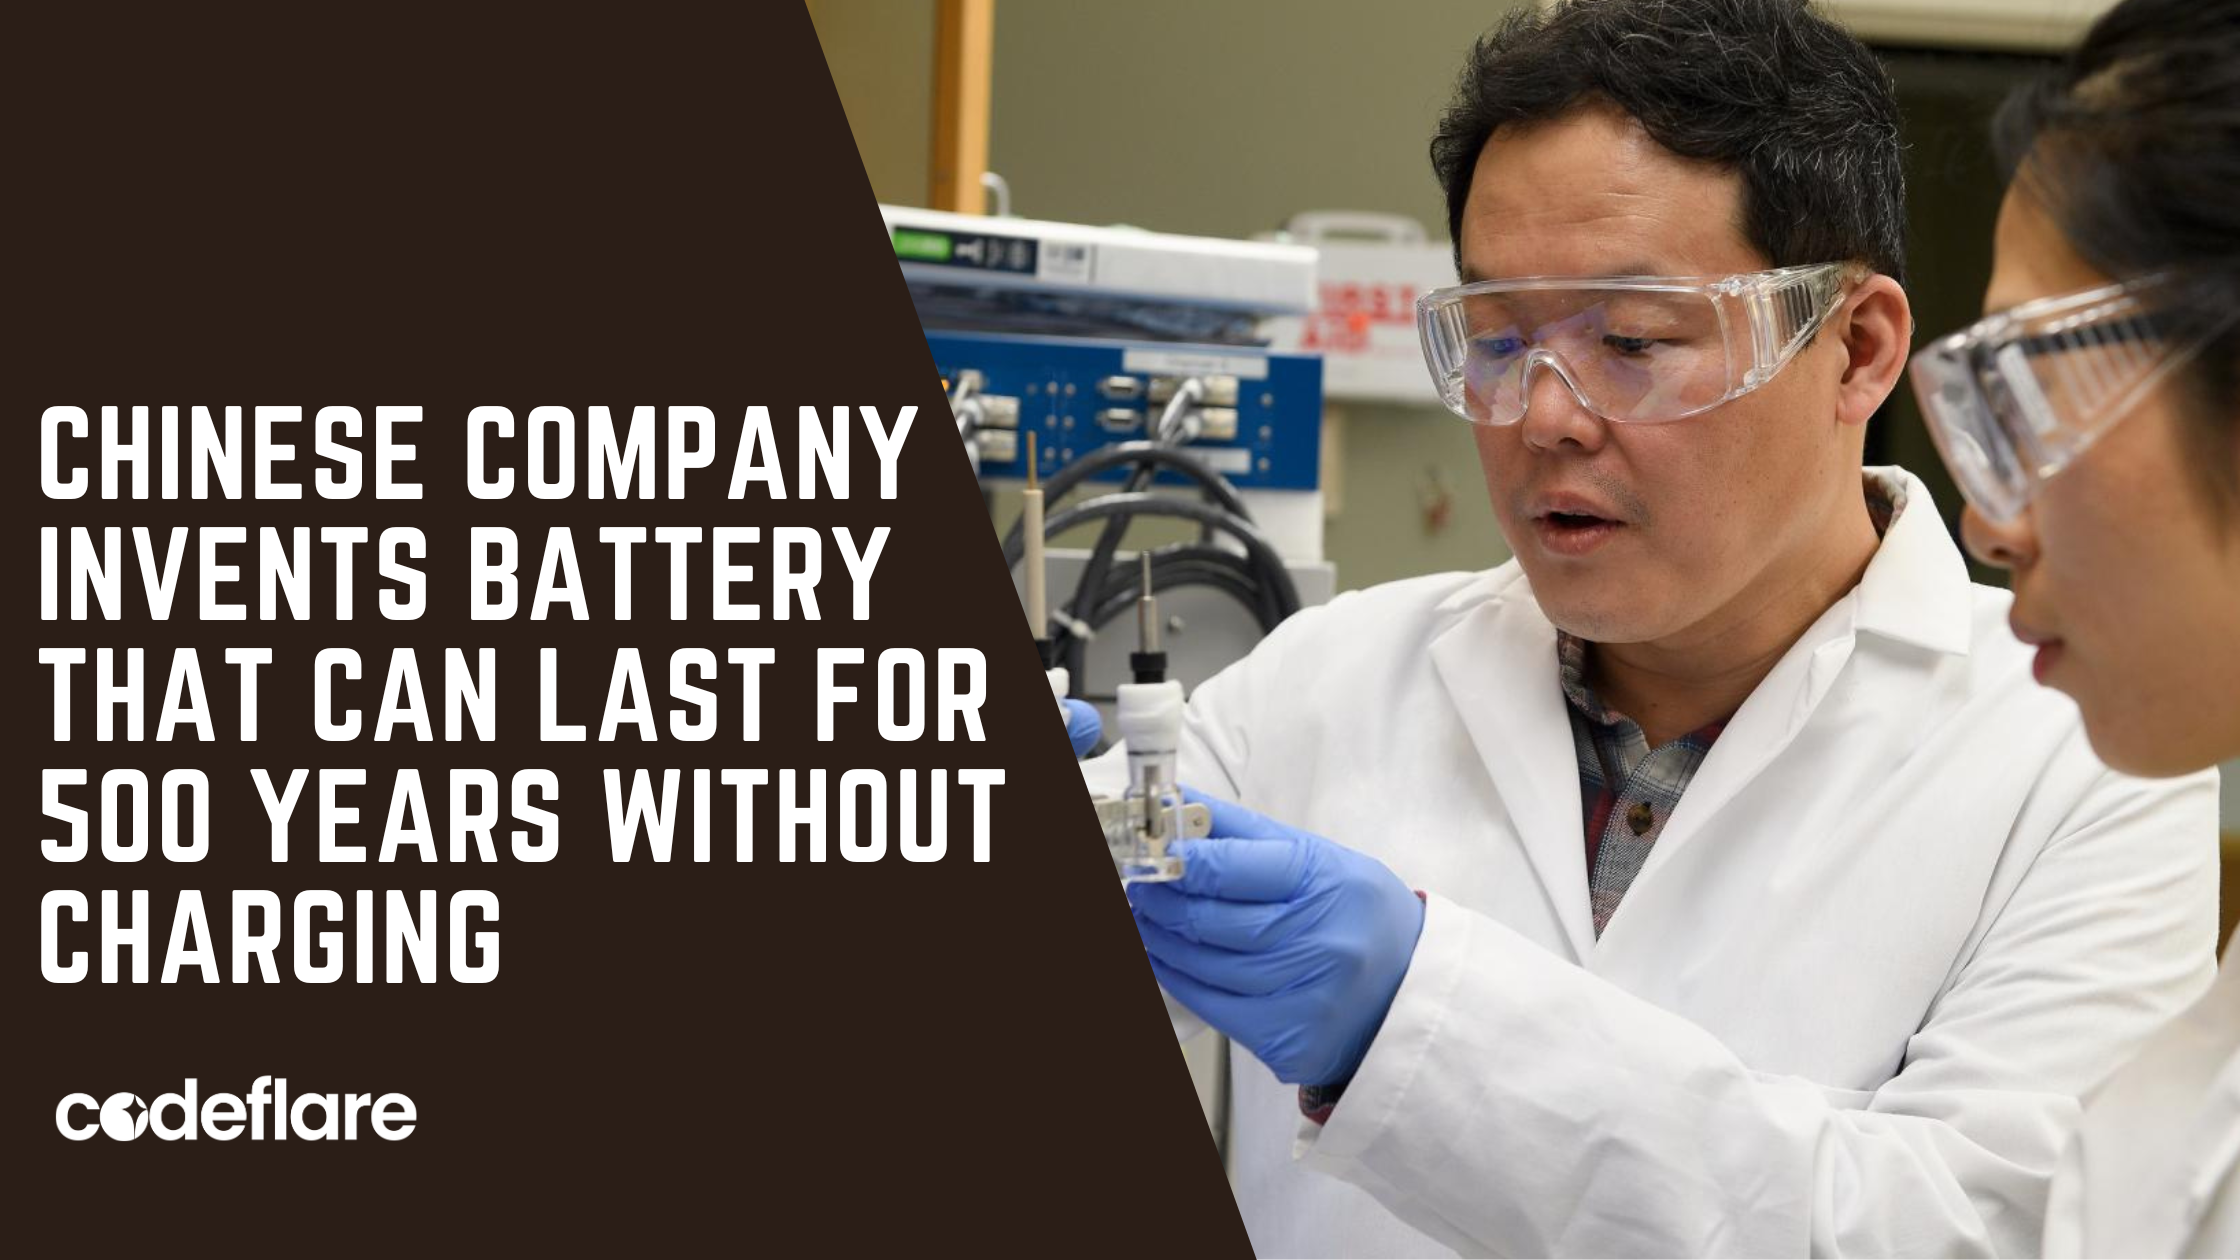 Chinese company invents battery that can last for 50 years